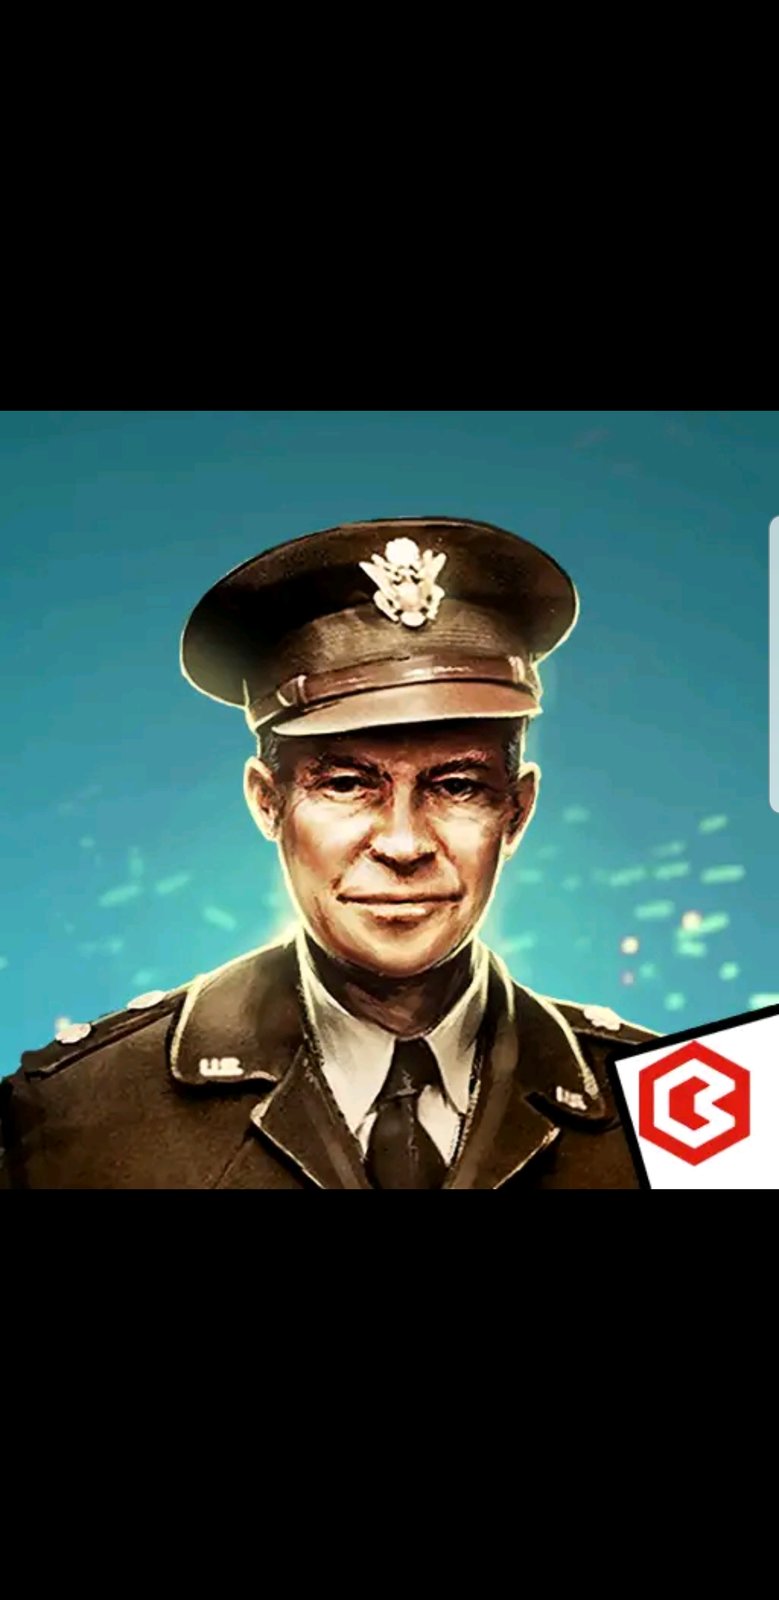 Call of War -  - Android & iOS MODs, Mobile Games & Apps